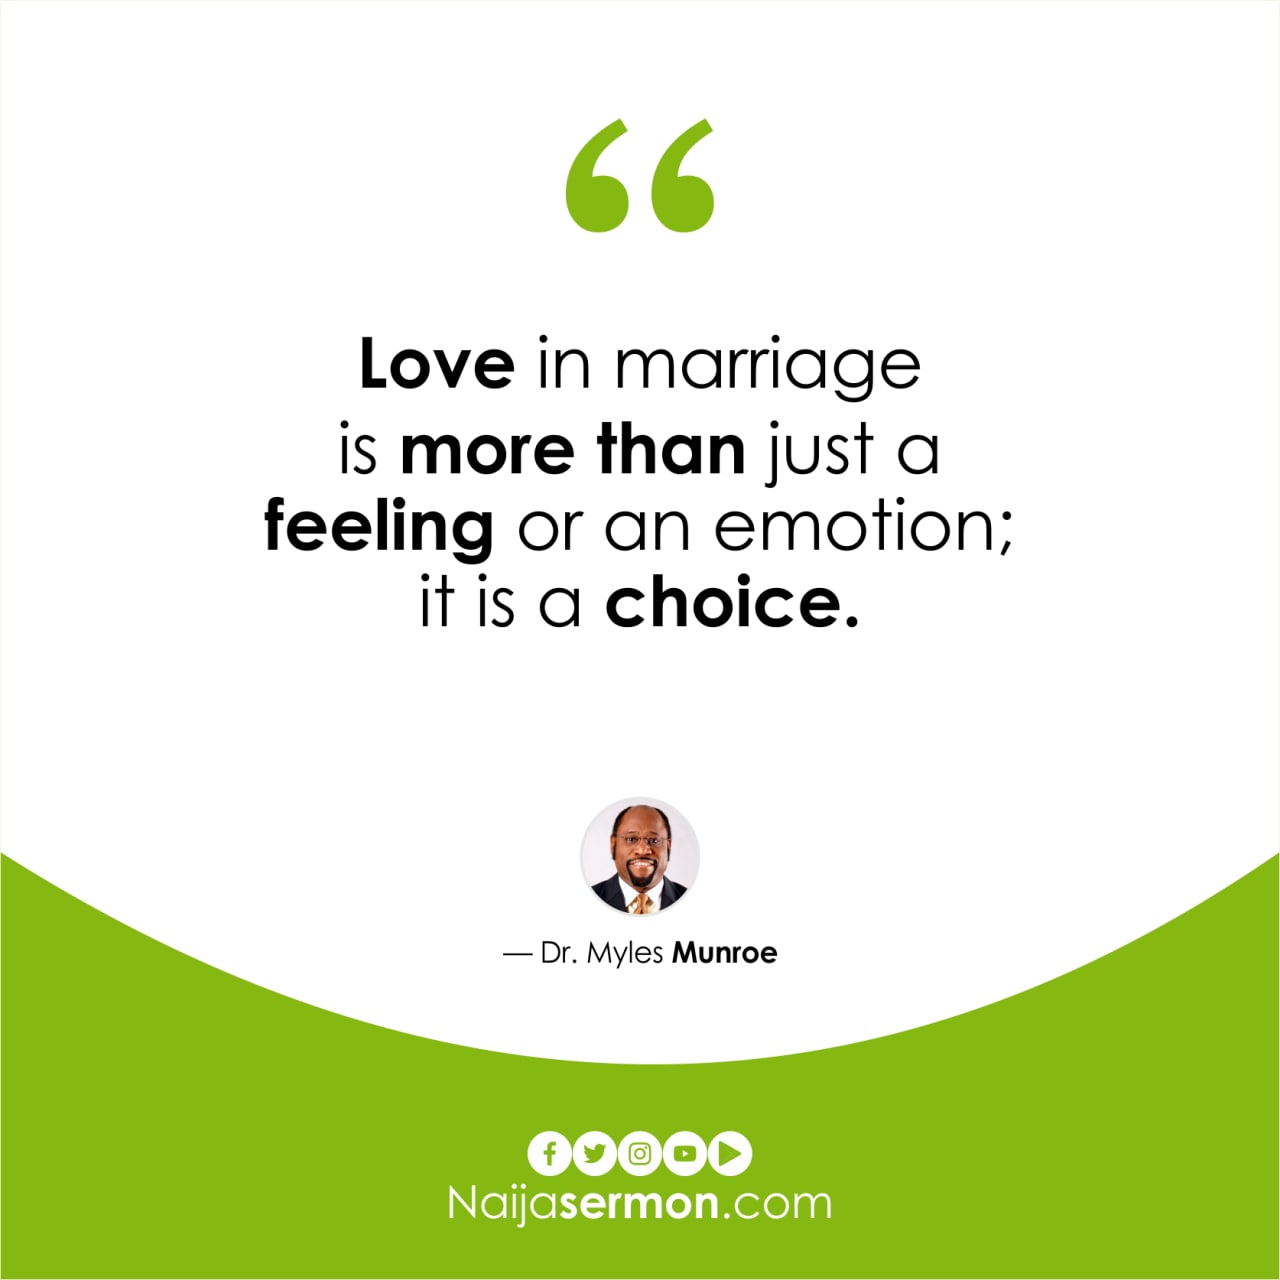 QUOTE OF THE DAY BY DR. MYLES MUNROE 17